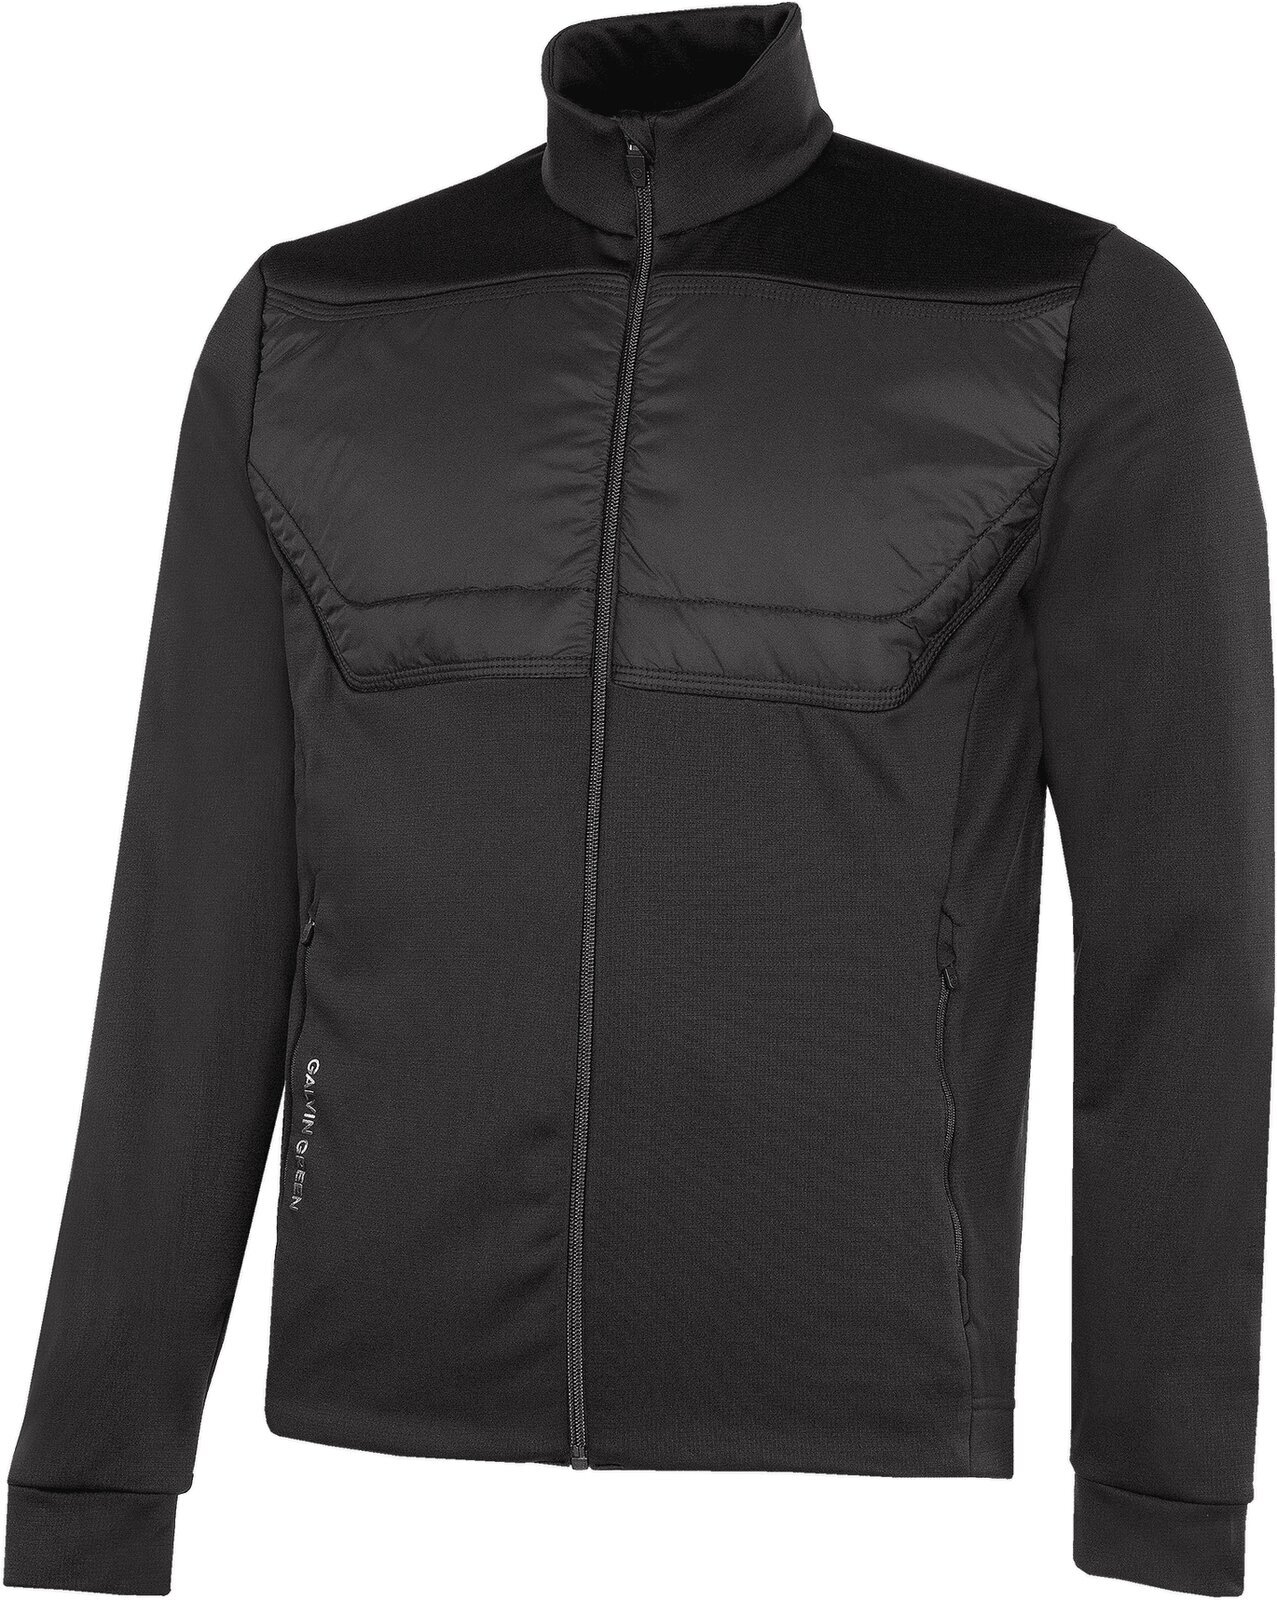 Jacket Galvin Green Dylan Mens Insulating Mid Layer Black L